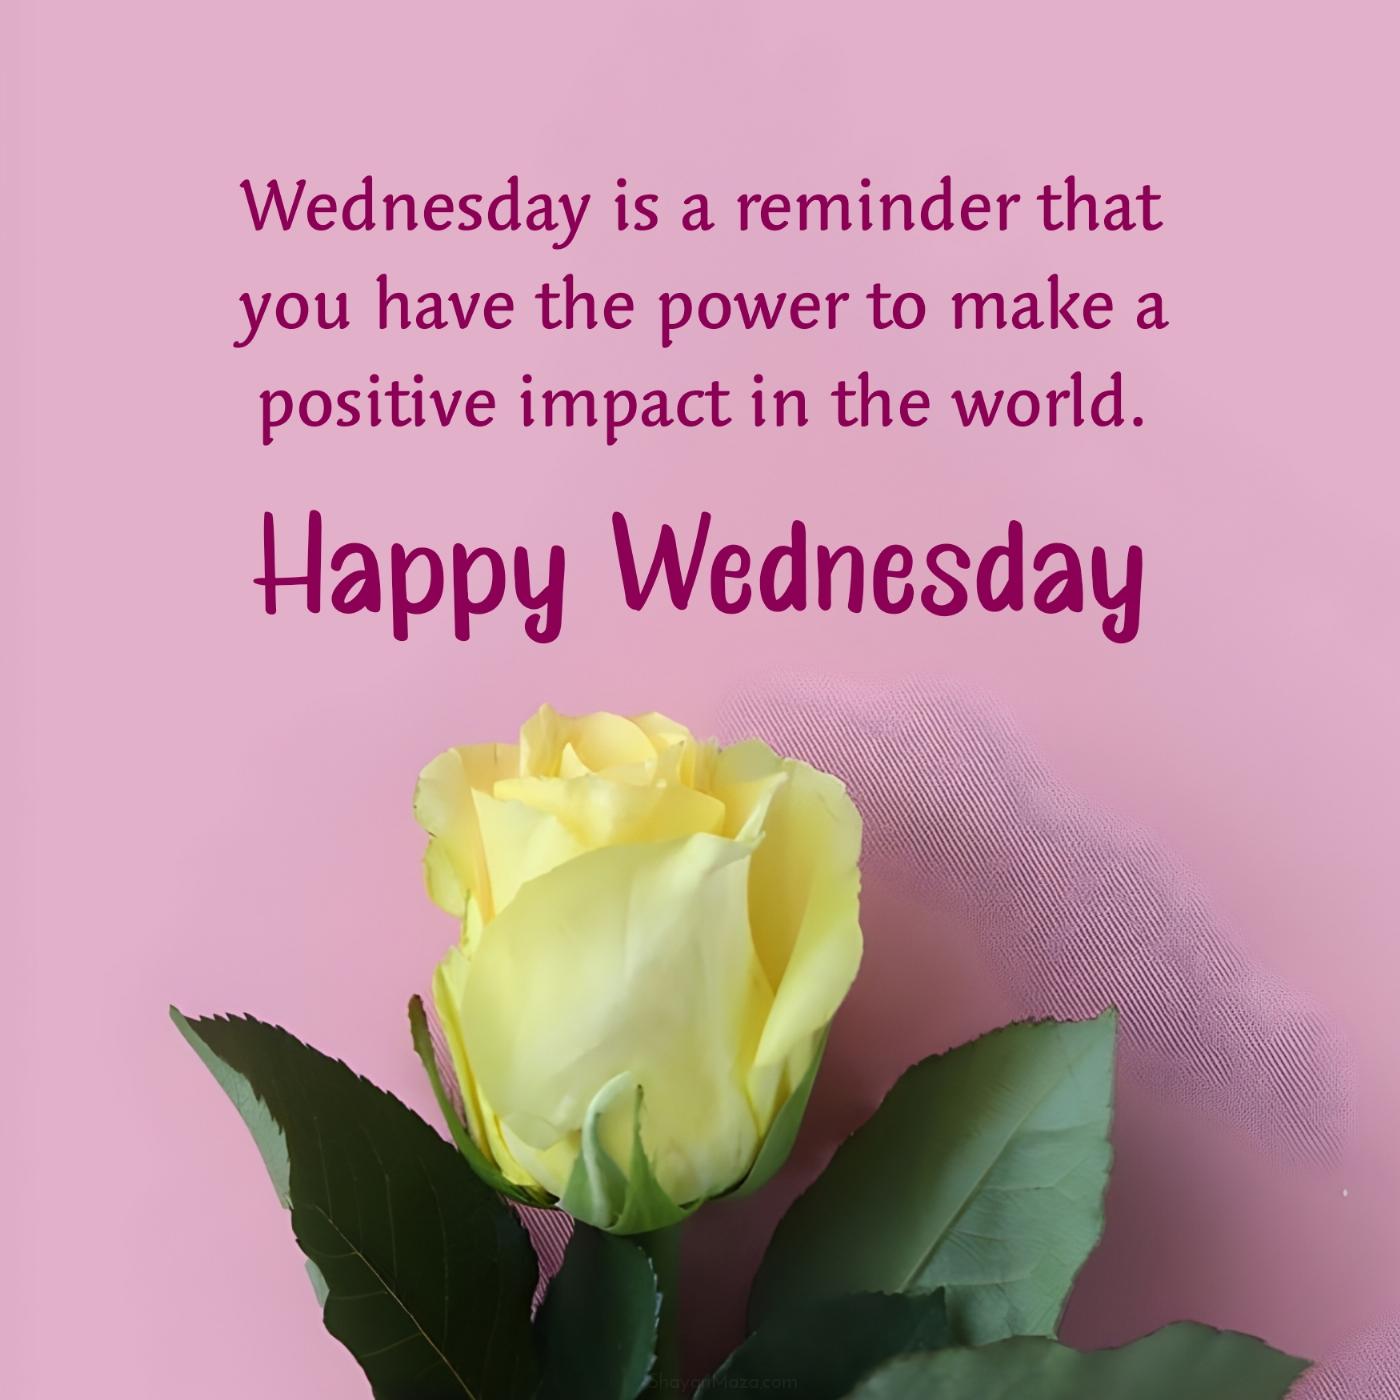 Wednesday is a reminder that you have the power to make a positive impact